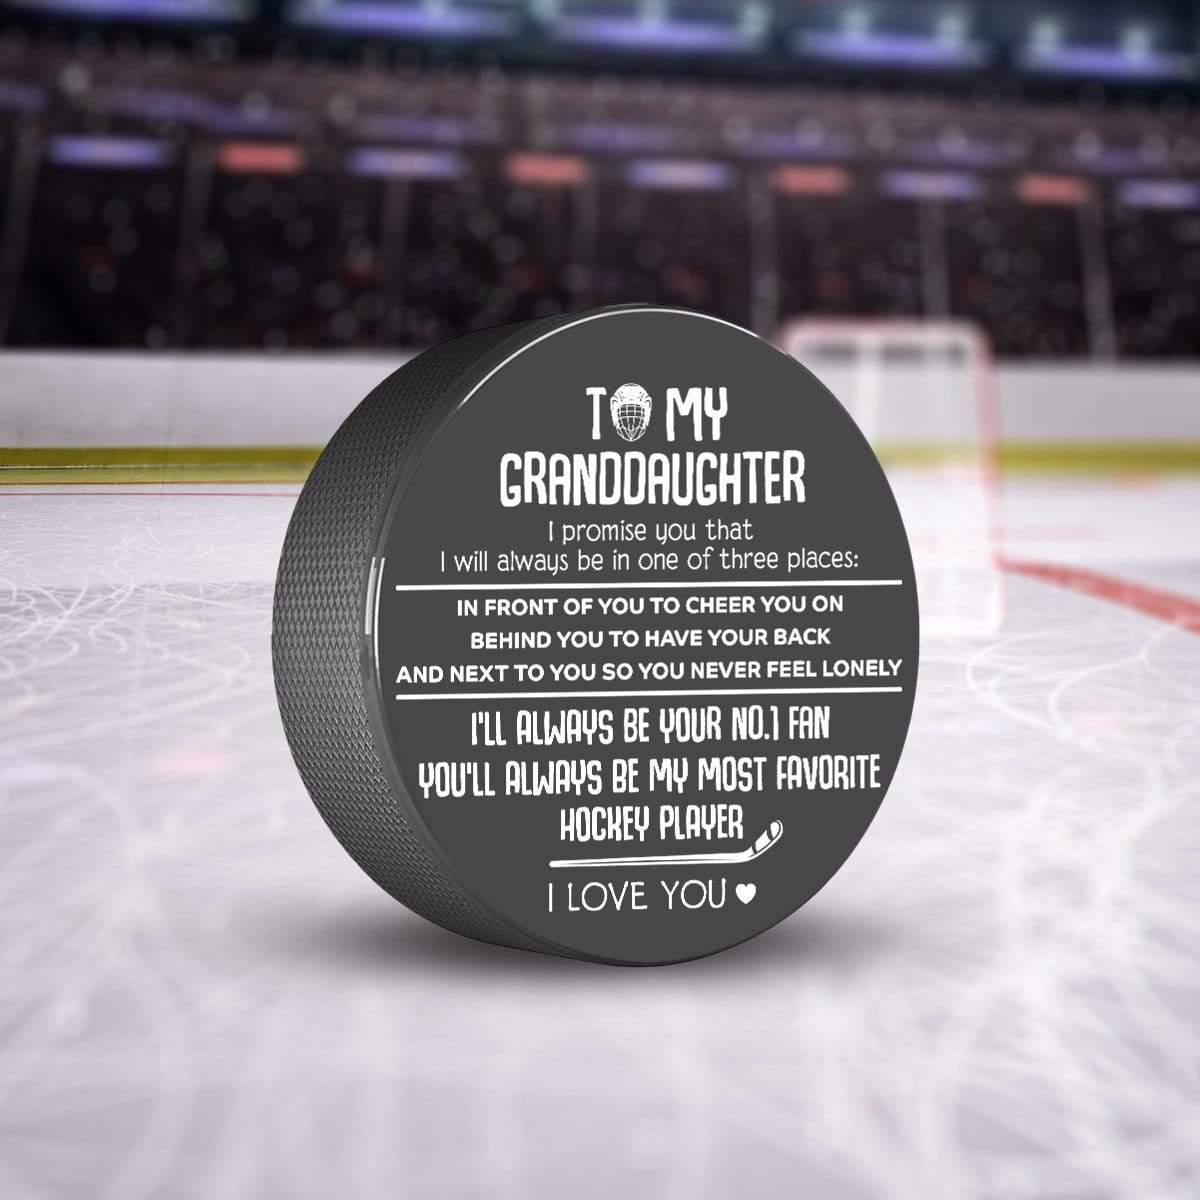 Hockey Puck - Hockey - To My Granddaughter - I'll Always Be Your No.1 Fan - Gai23002